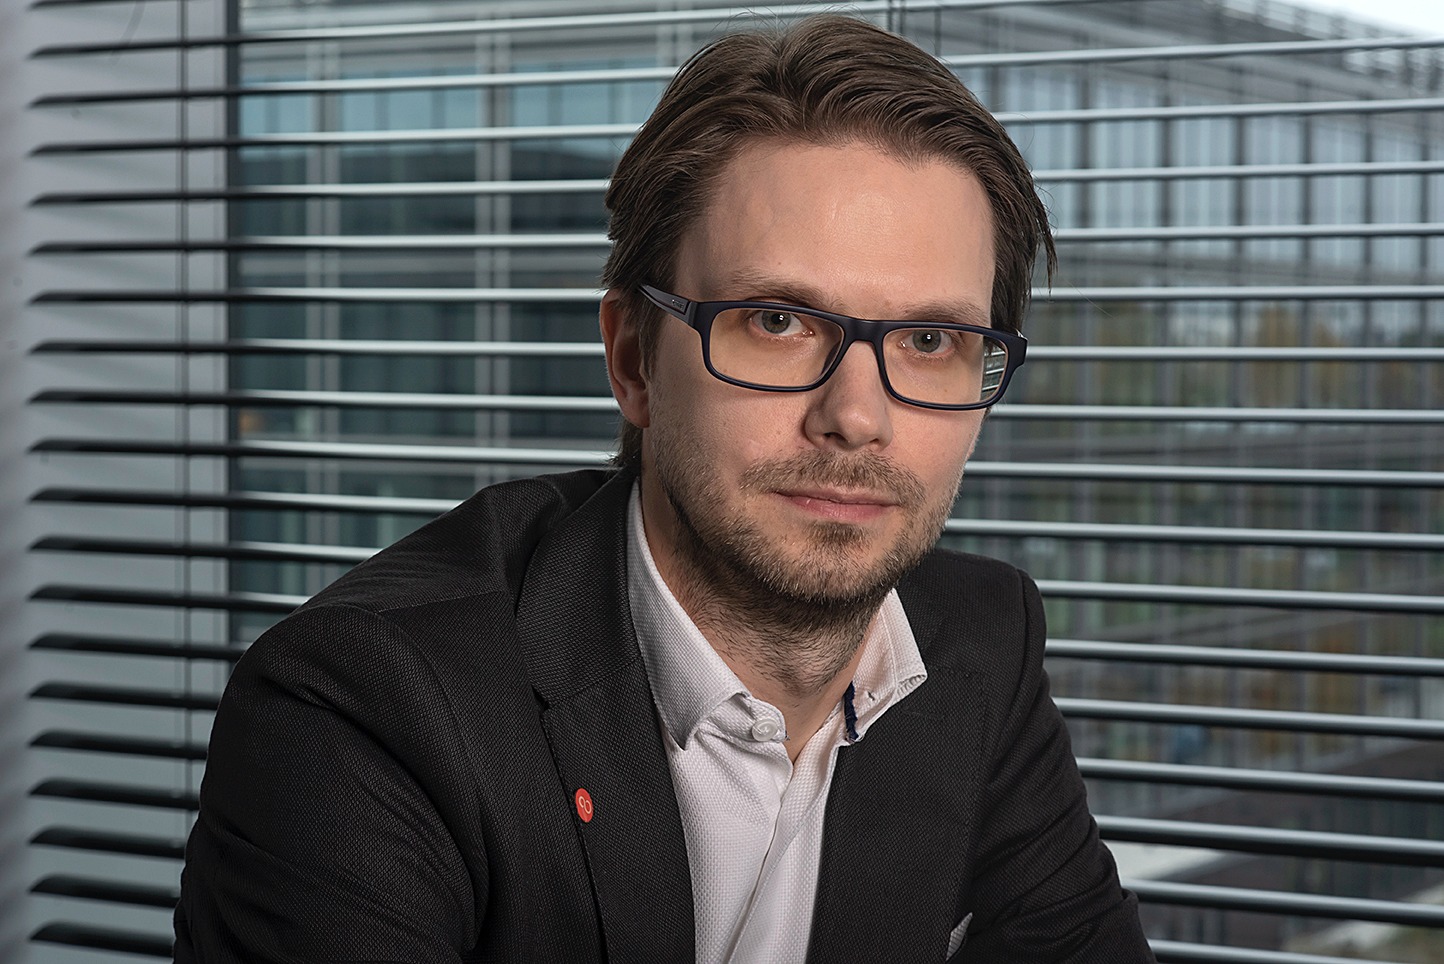 Business innovation requires the acquisition of skills and knowledge. Interview with Michał Grzegorzewski, Head of Solution Architects and Services Delivery in Fujitsu Poland